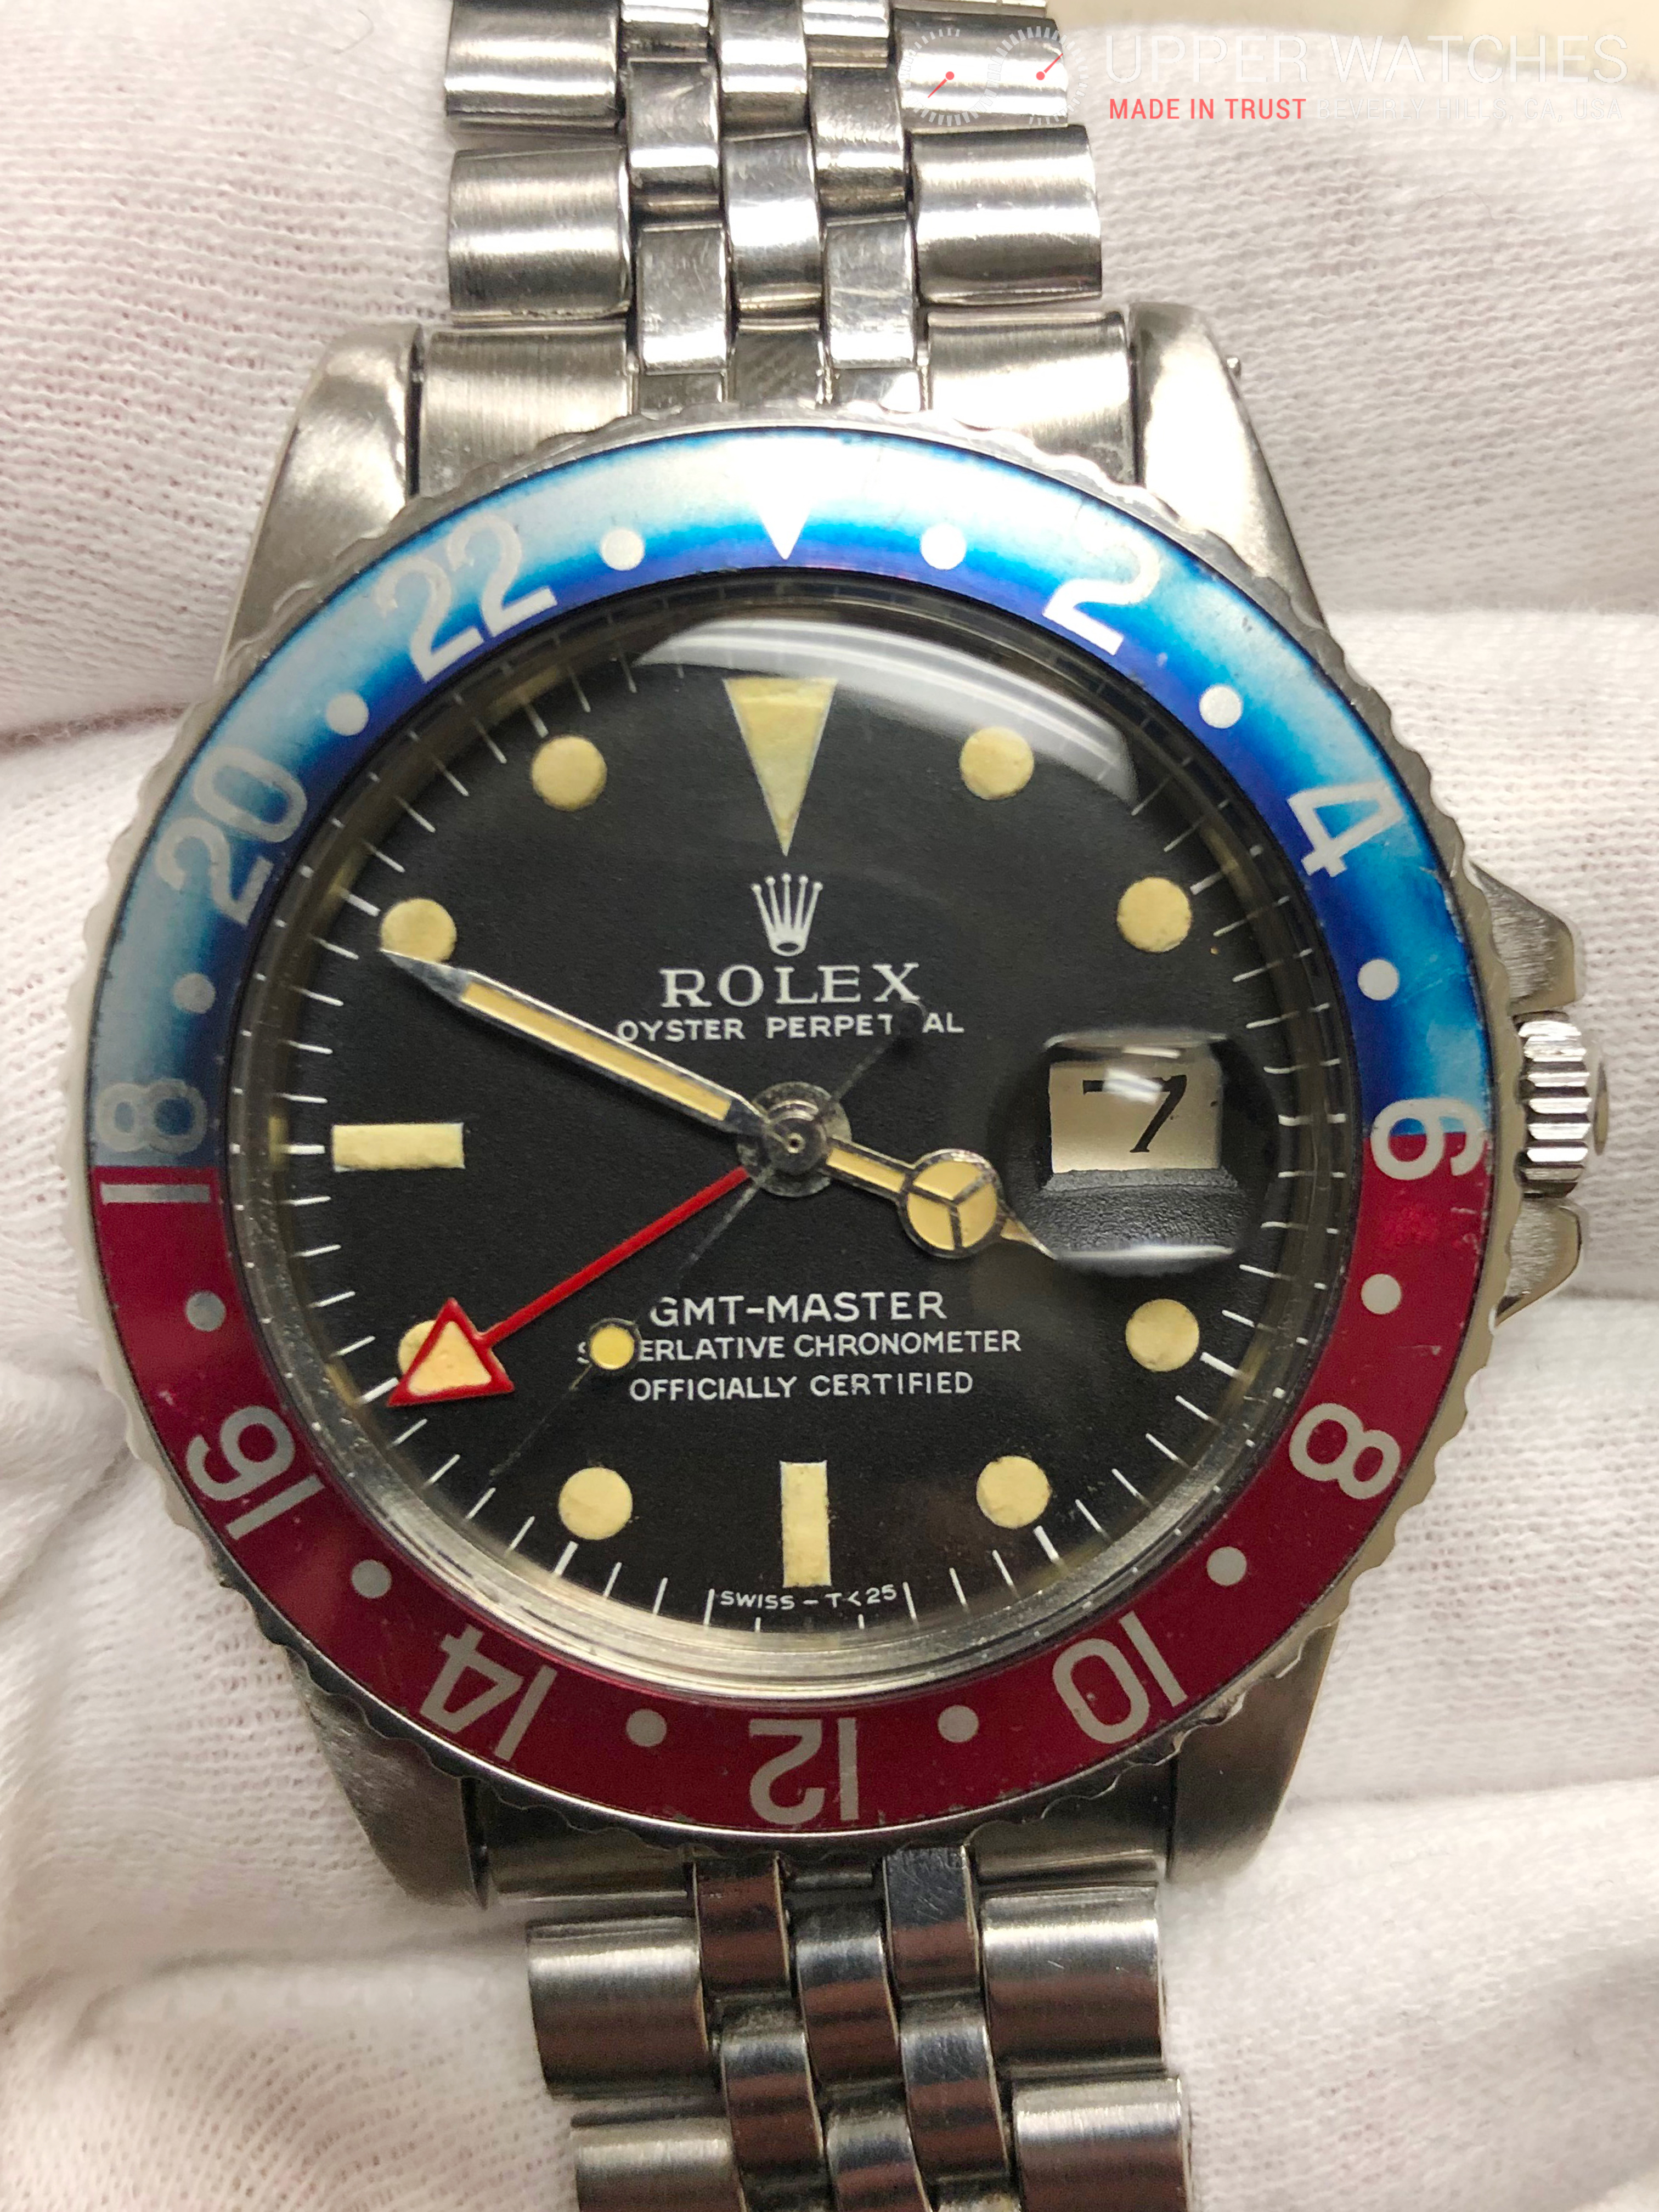 Rolex GMT Master Gorgeous Long E Dial, Red GMT Hand, Faded Pepsi Bezel Circa 1967 - Upper Watches